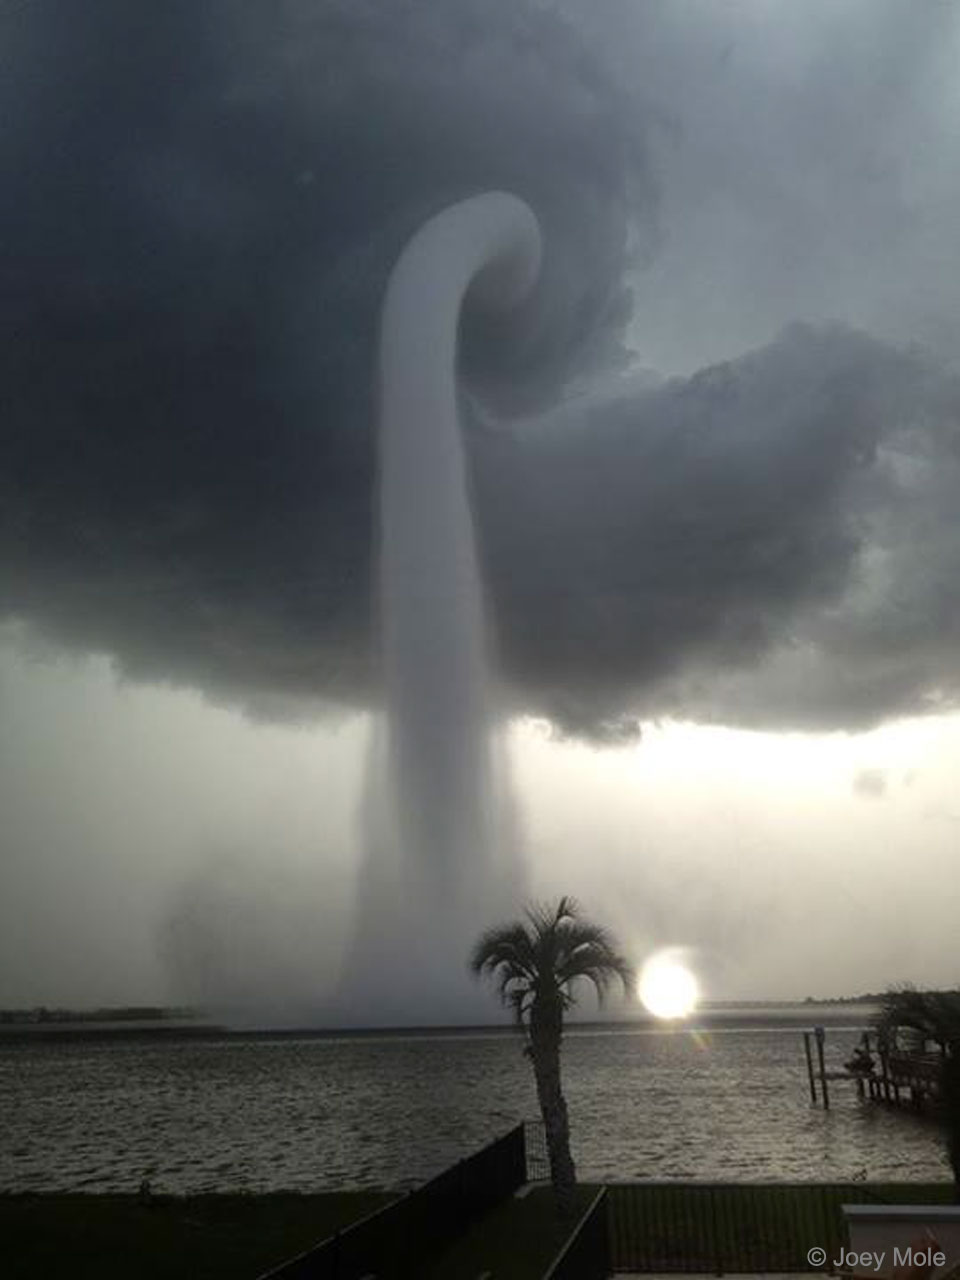 A thin gray funnel cloud is pictured connecting water
at the bottom to a cloud near the top. 
Please see the explanation for more detailed information.